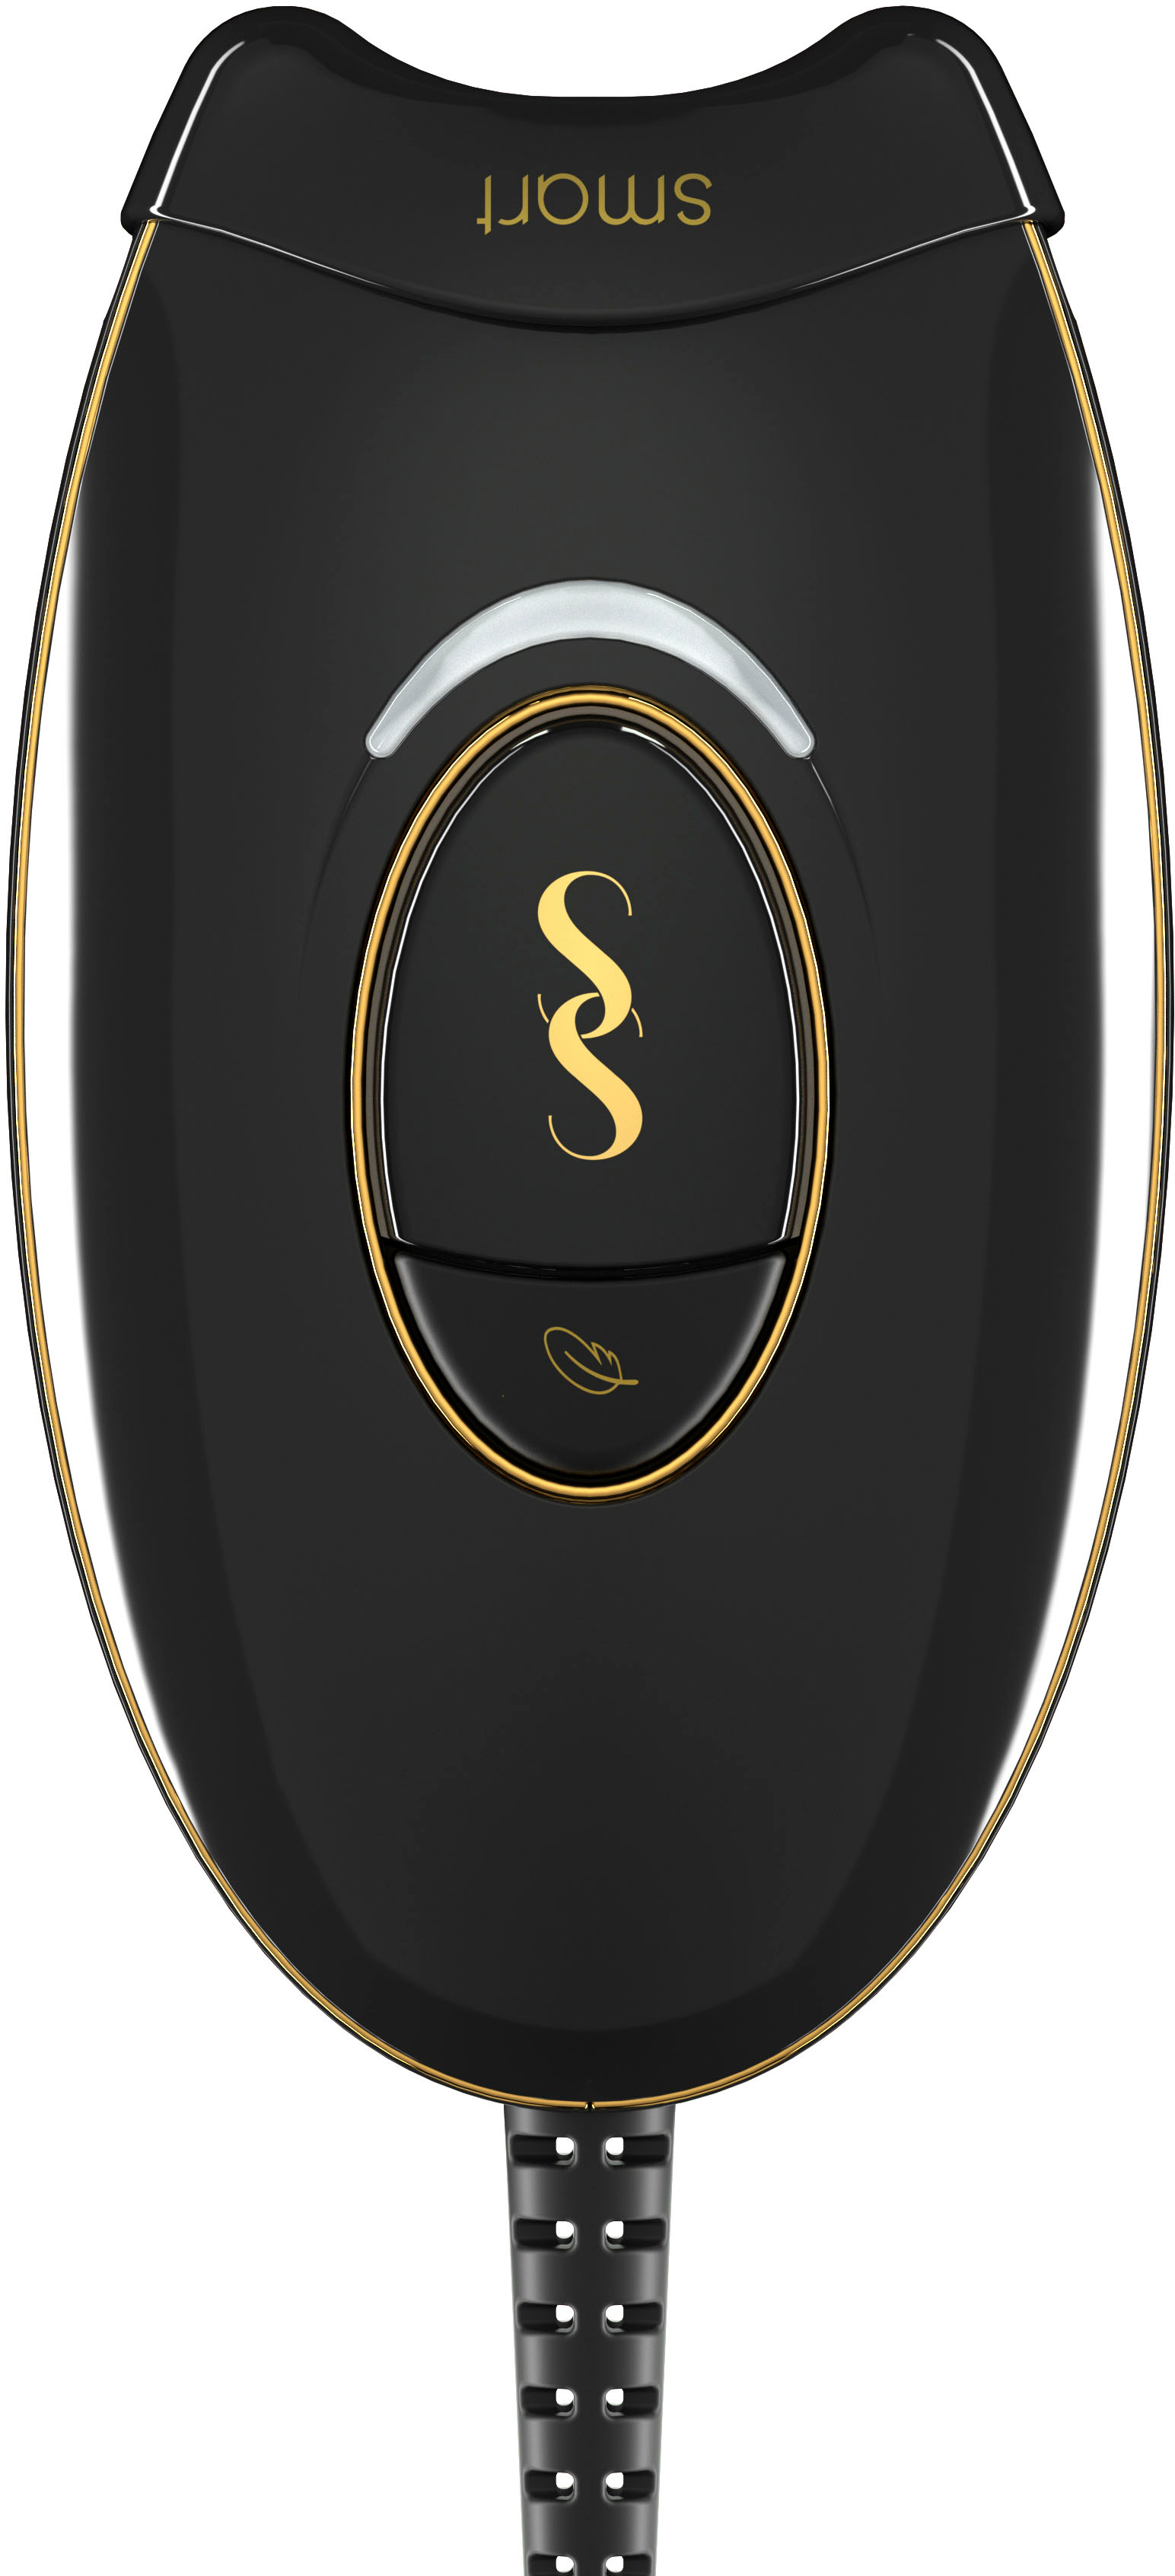 SmoothSkin Pure Mini IPL Hair Removal System Black - Best Buy